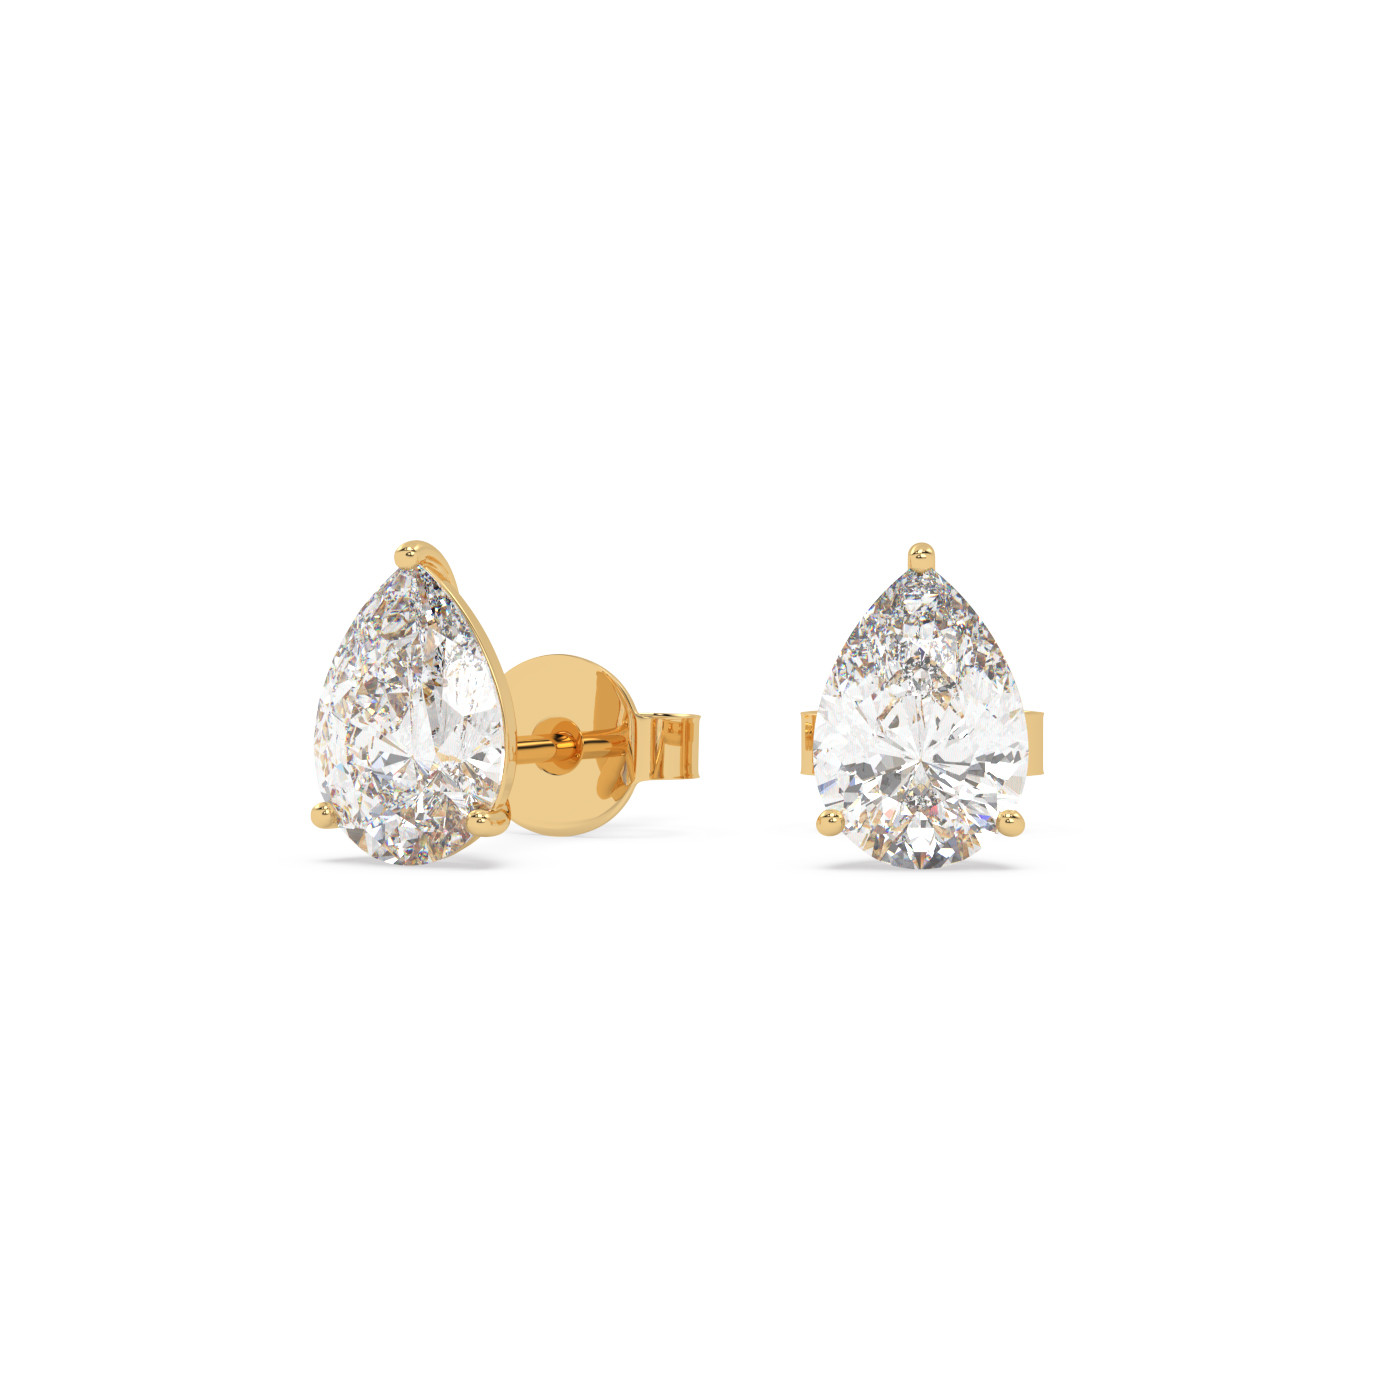 18k yellow gold  1.4 carat pear stud earrings with butterfly back Photos & images